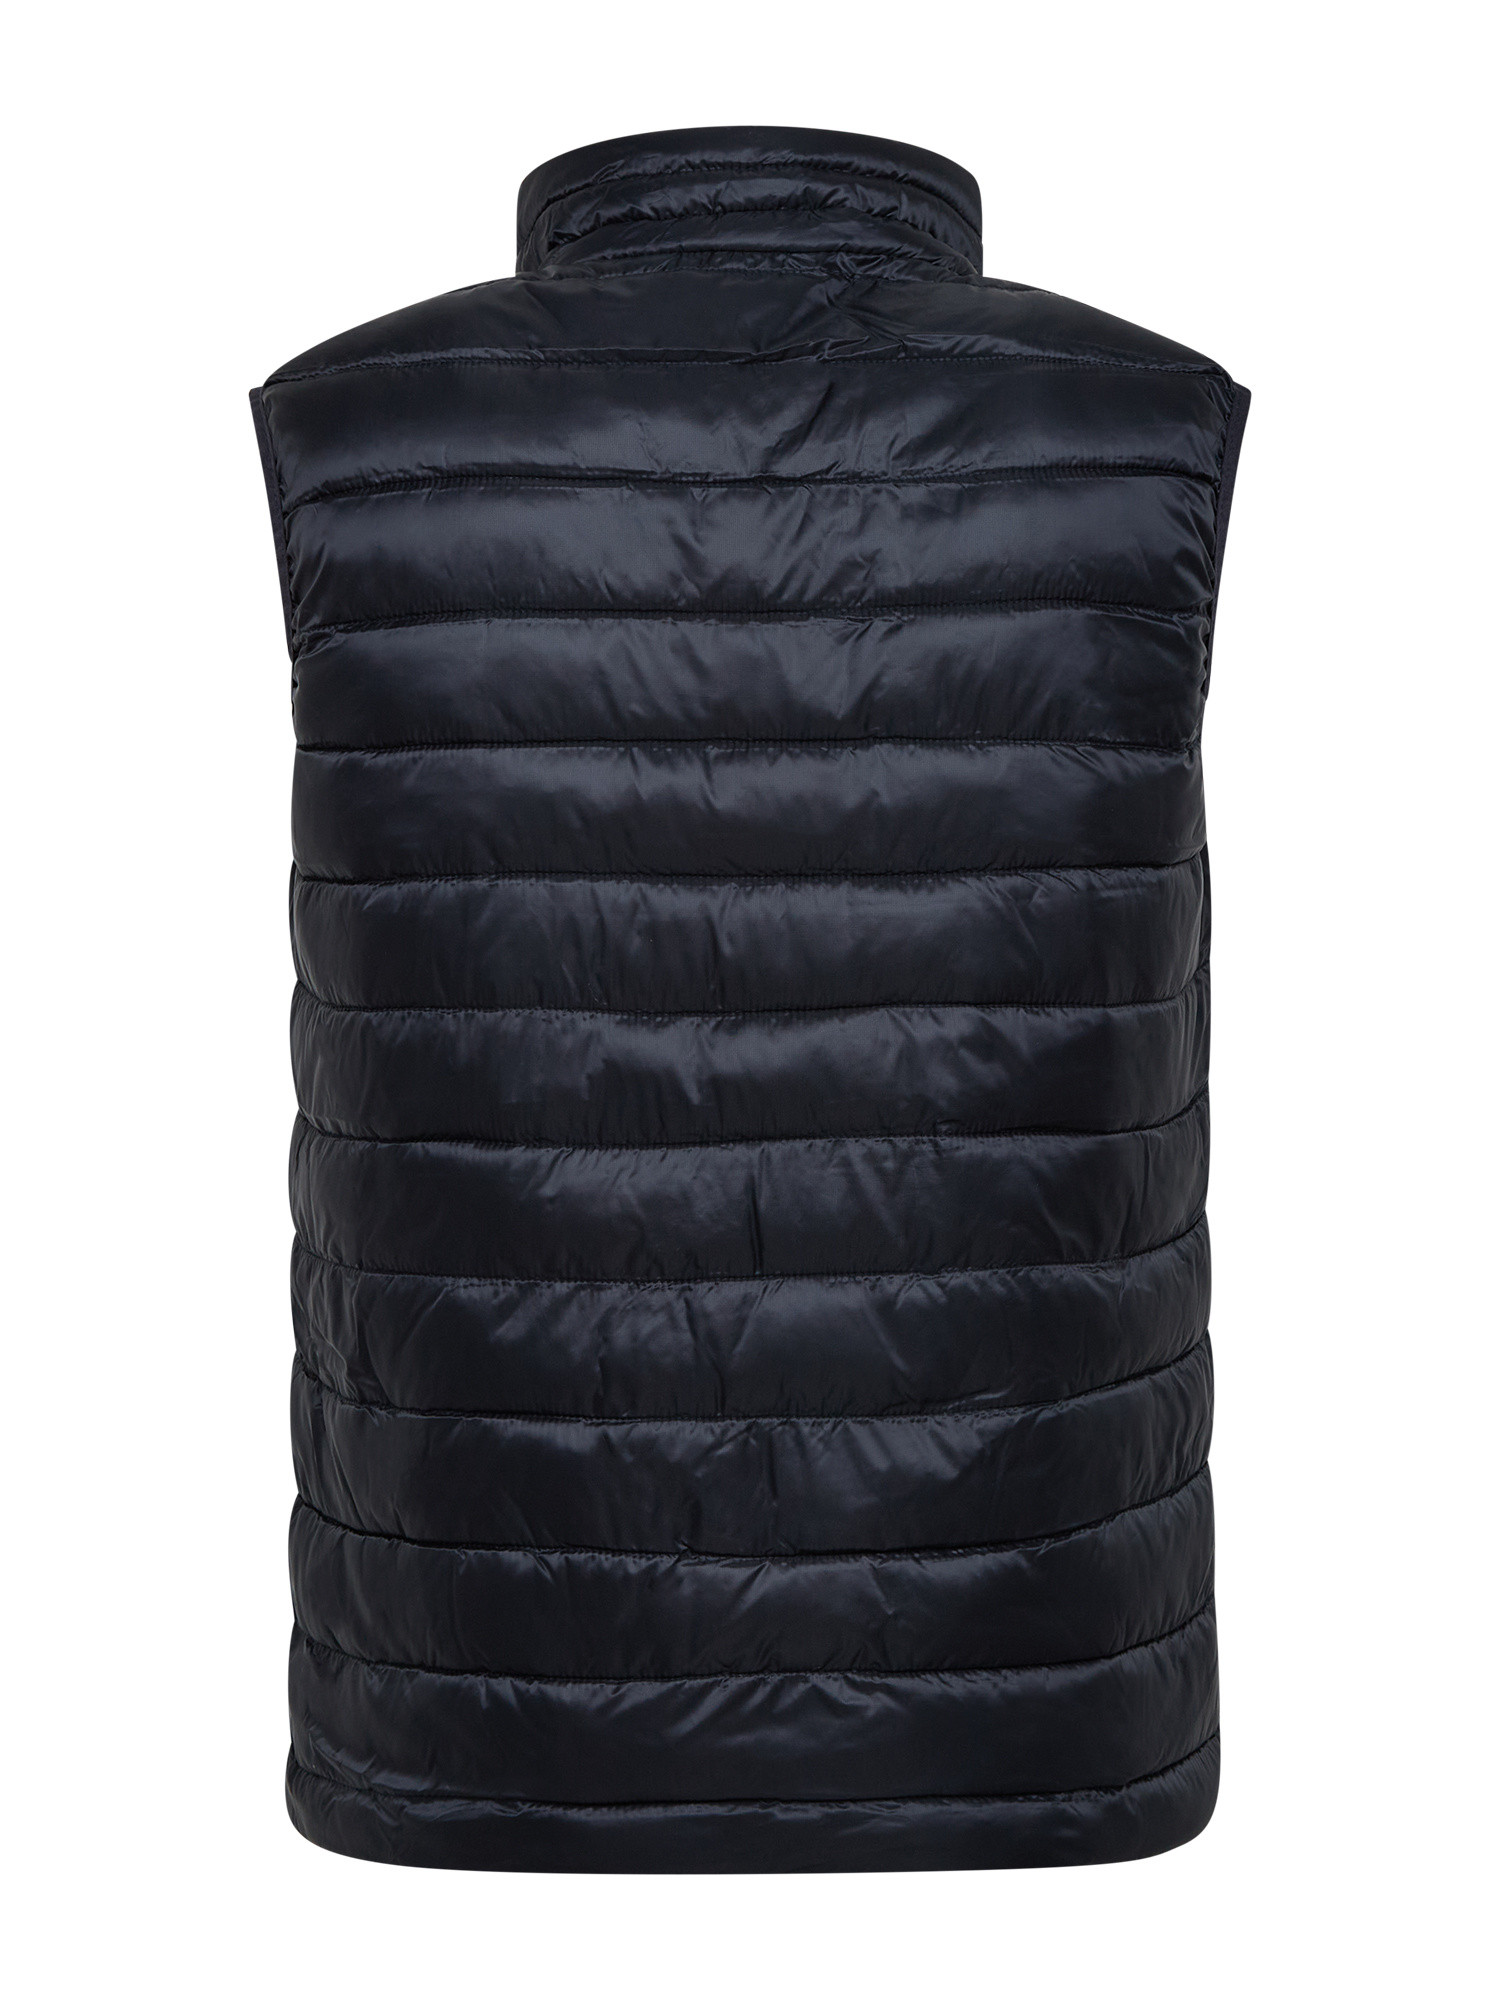 Canadian - Tylers Bay Recycled Vest, Dark Blue, large image number 1